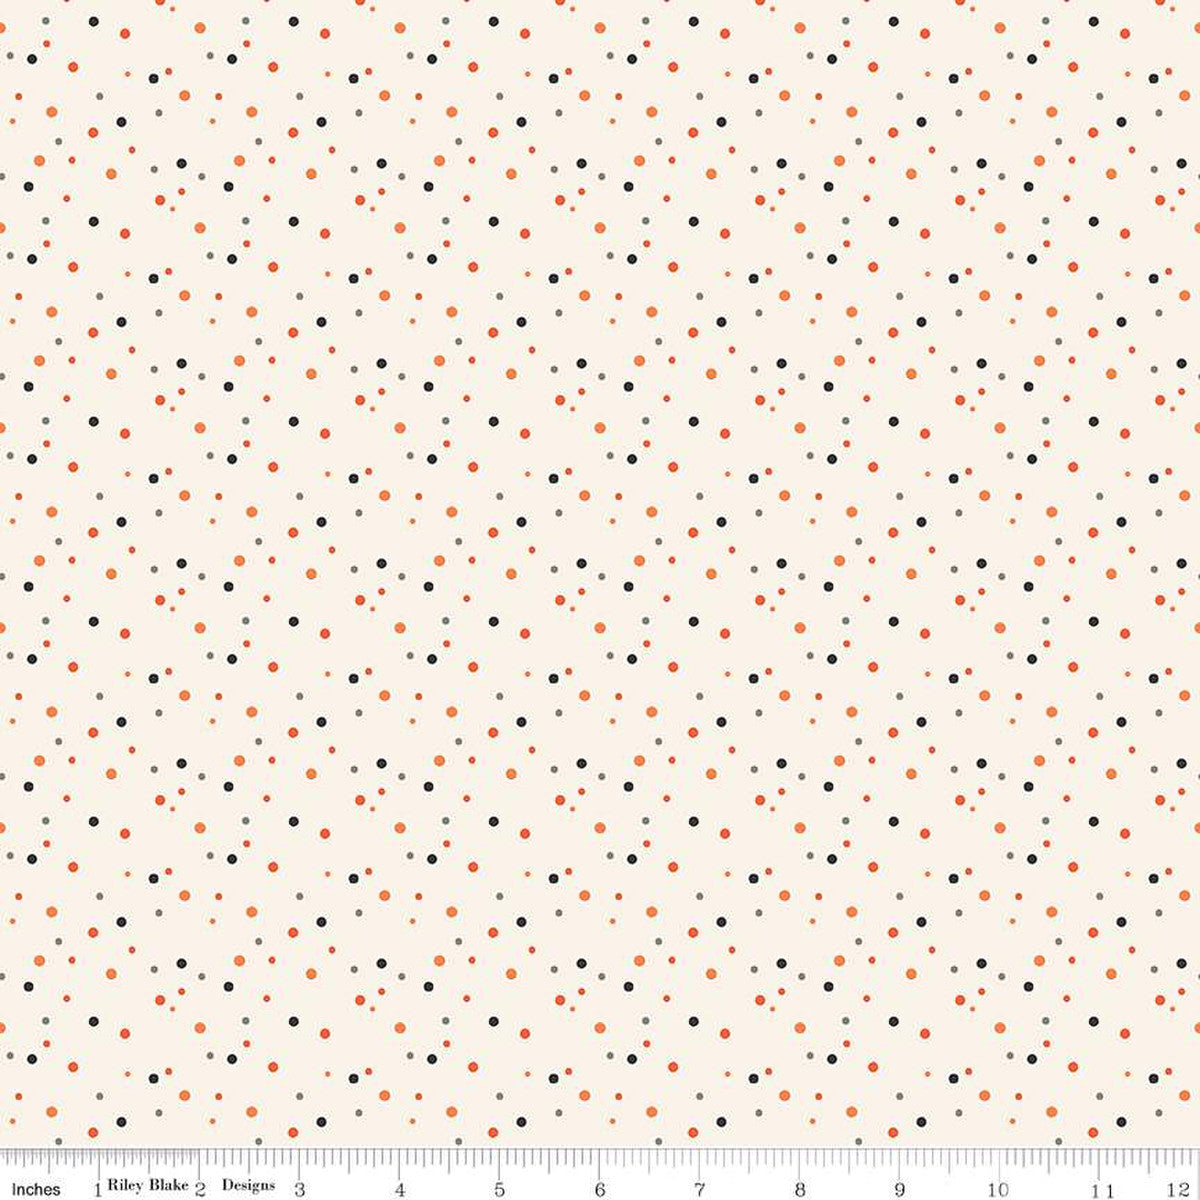 Hey Bootiful Plaid Offwhite Halloween Basic Background Riley Blake Designs charcoal orange rust irregular dots polka on off white background cotton quilt weight material fabric